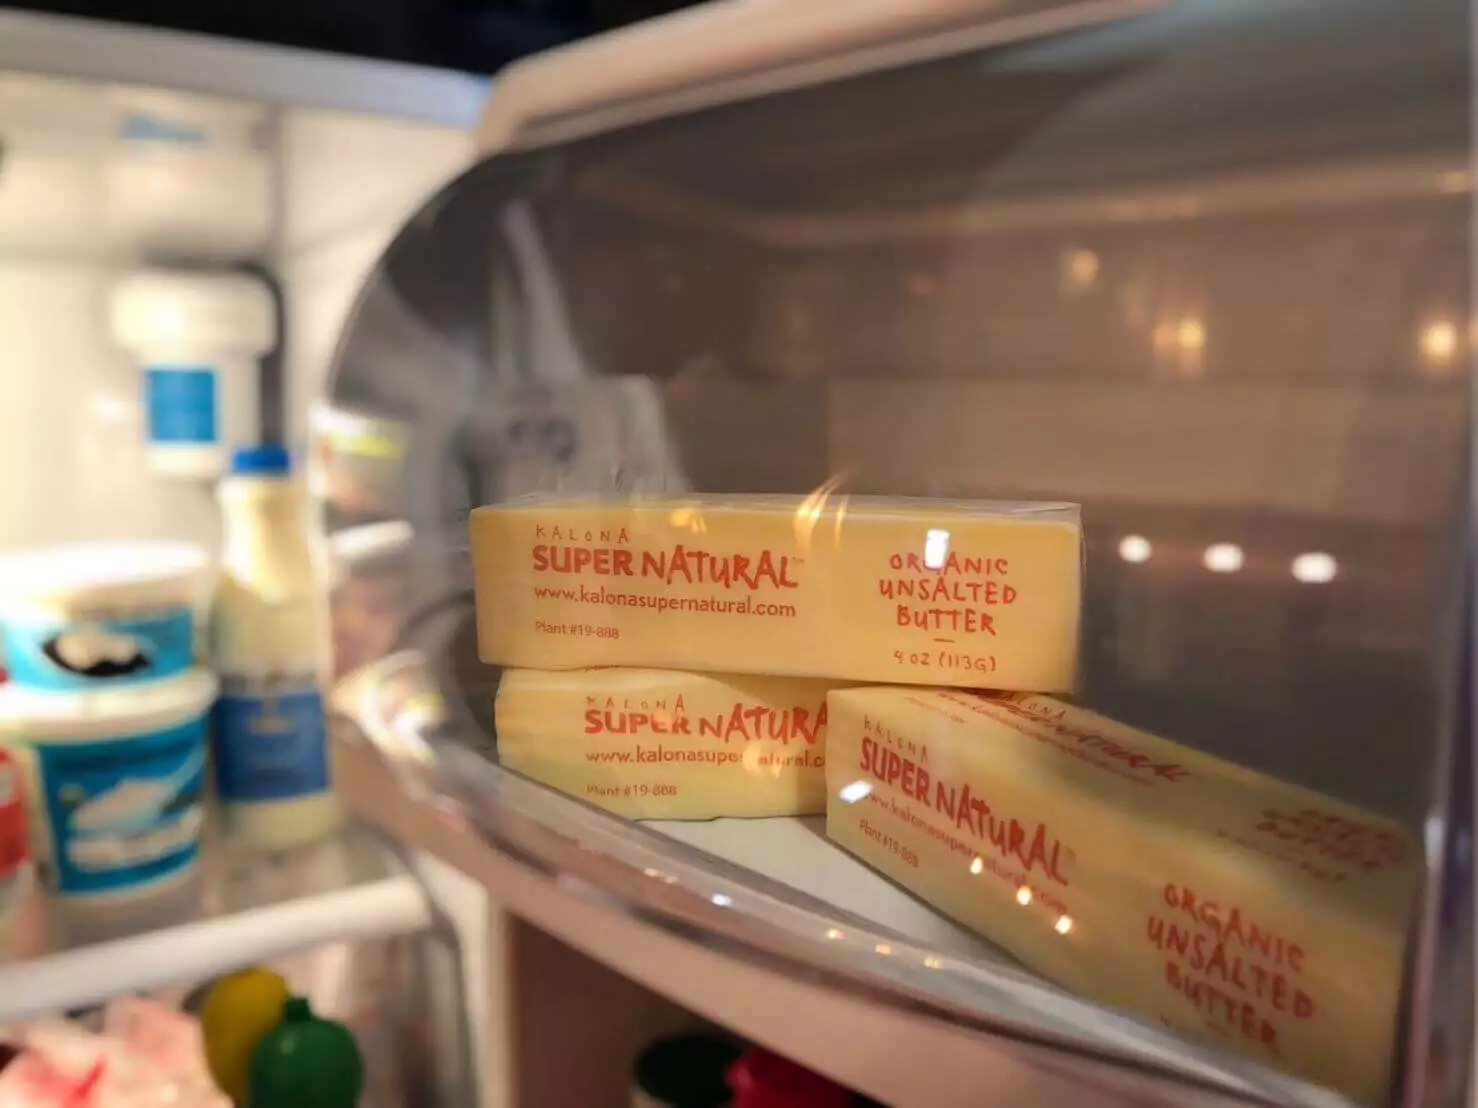 There is some butter in the fridge